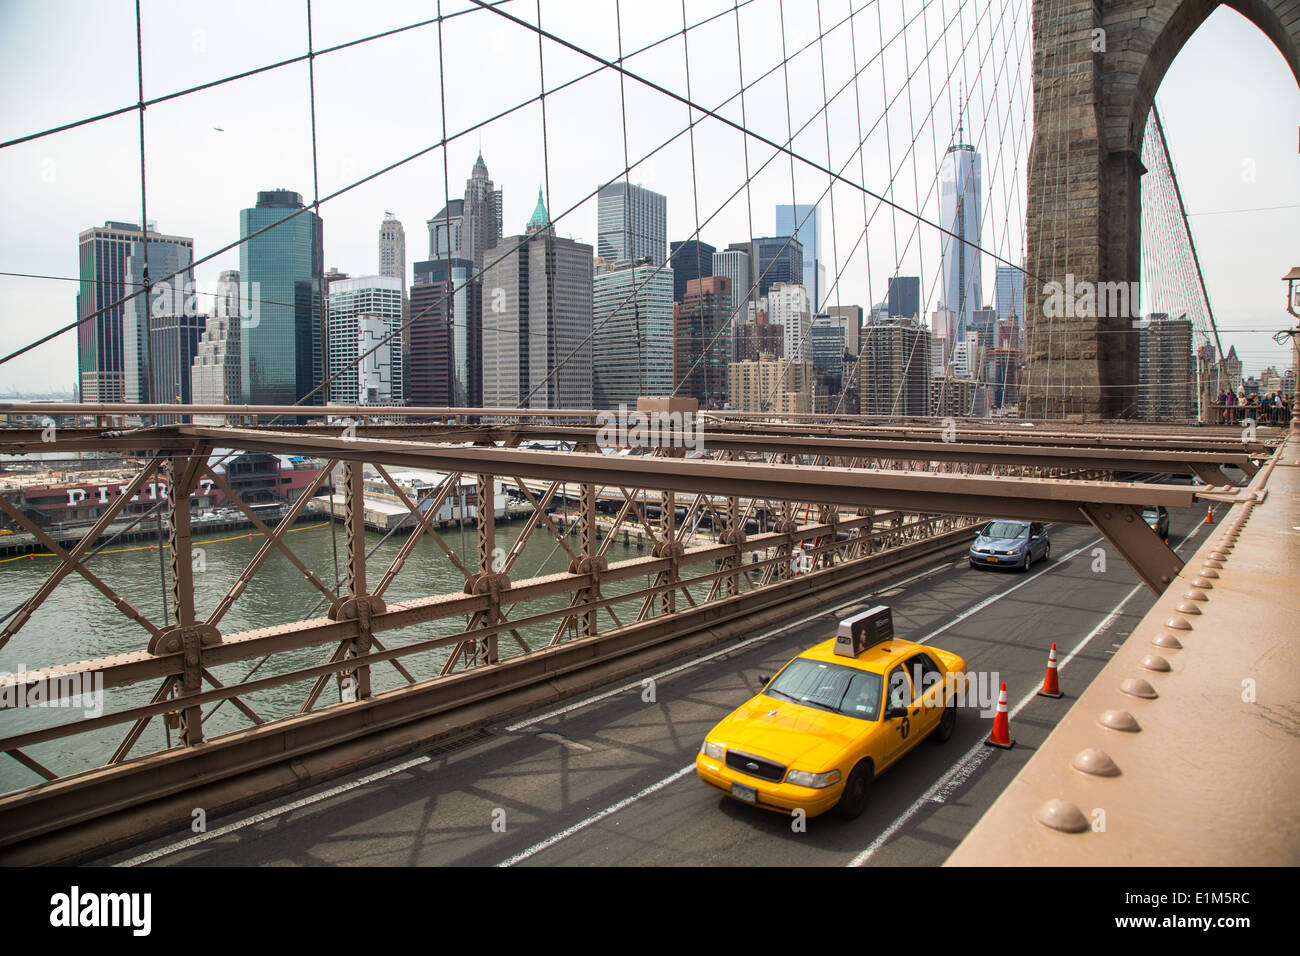 A Taxi Cab travelling over Brooklyn Bridge, NYC Stock Photo